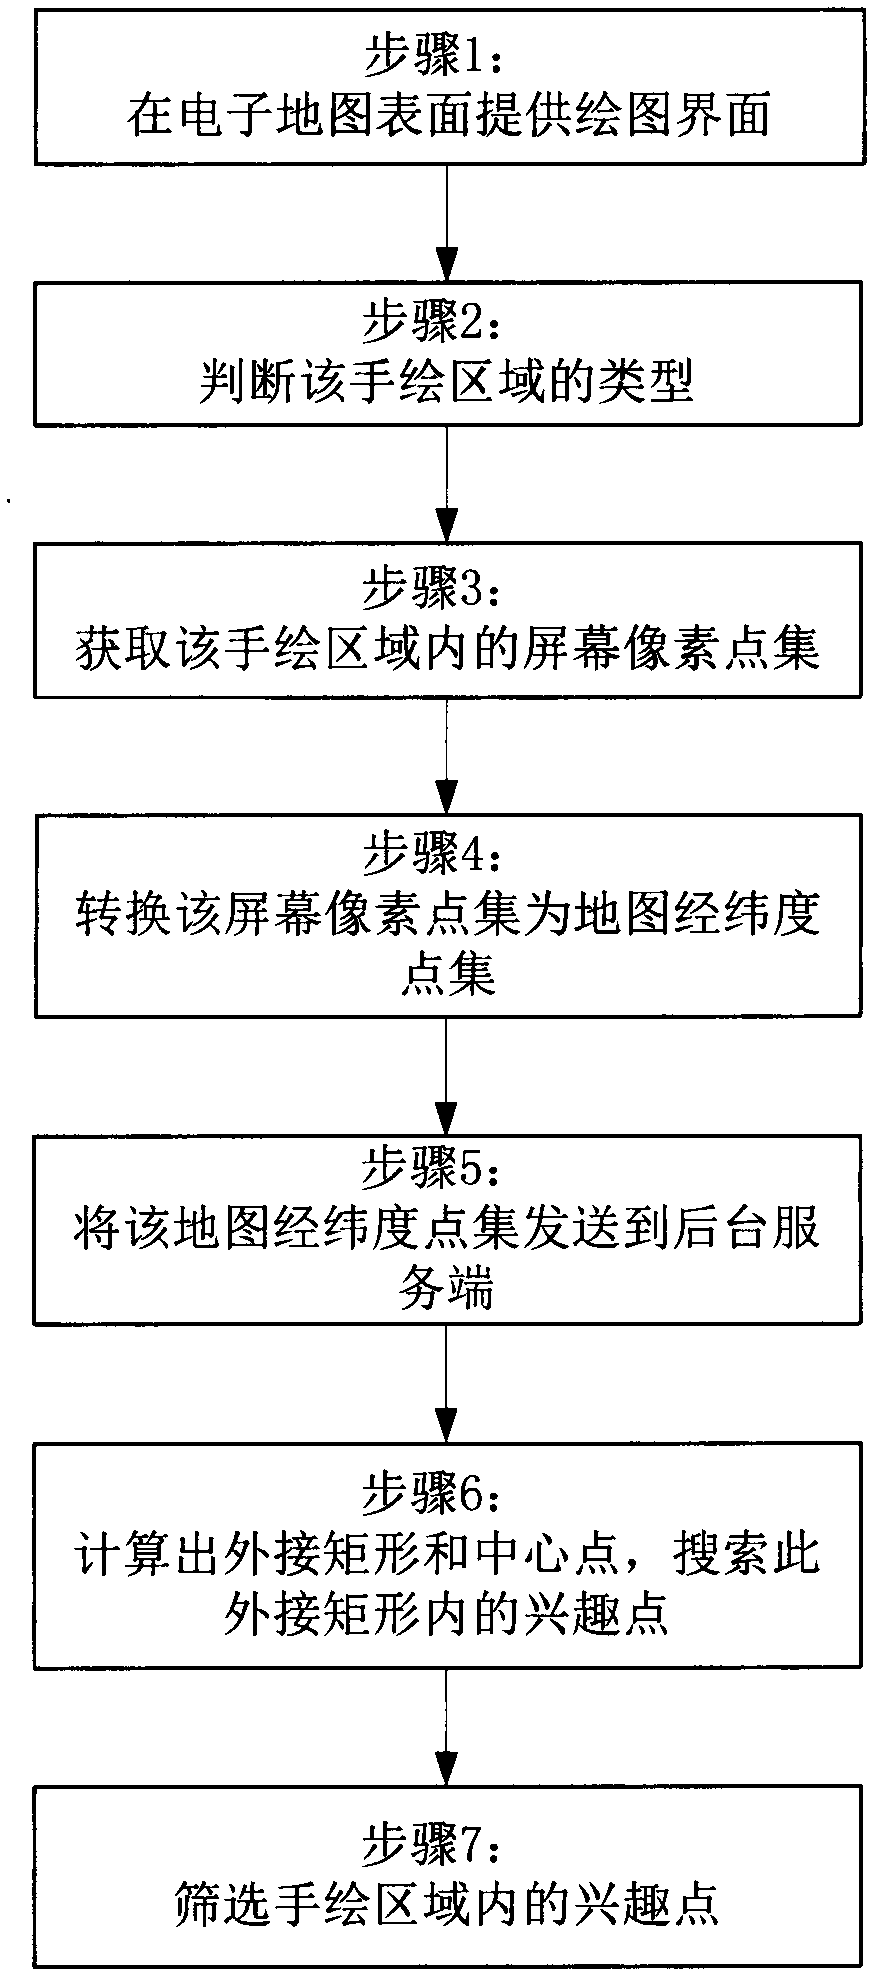 Method for searching interest points in designated area of map by hand-drawing way